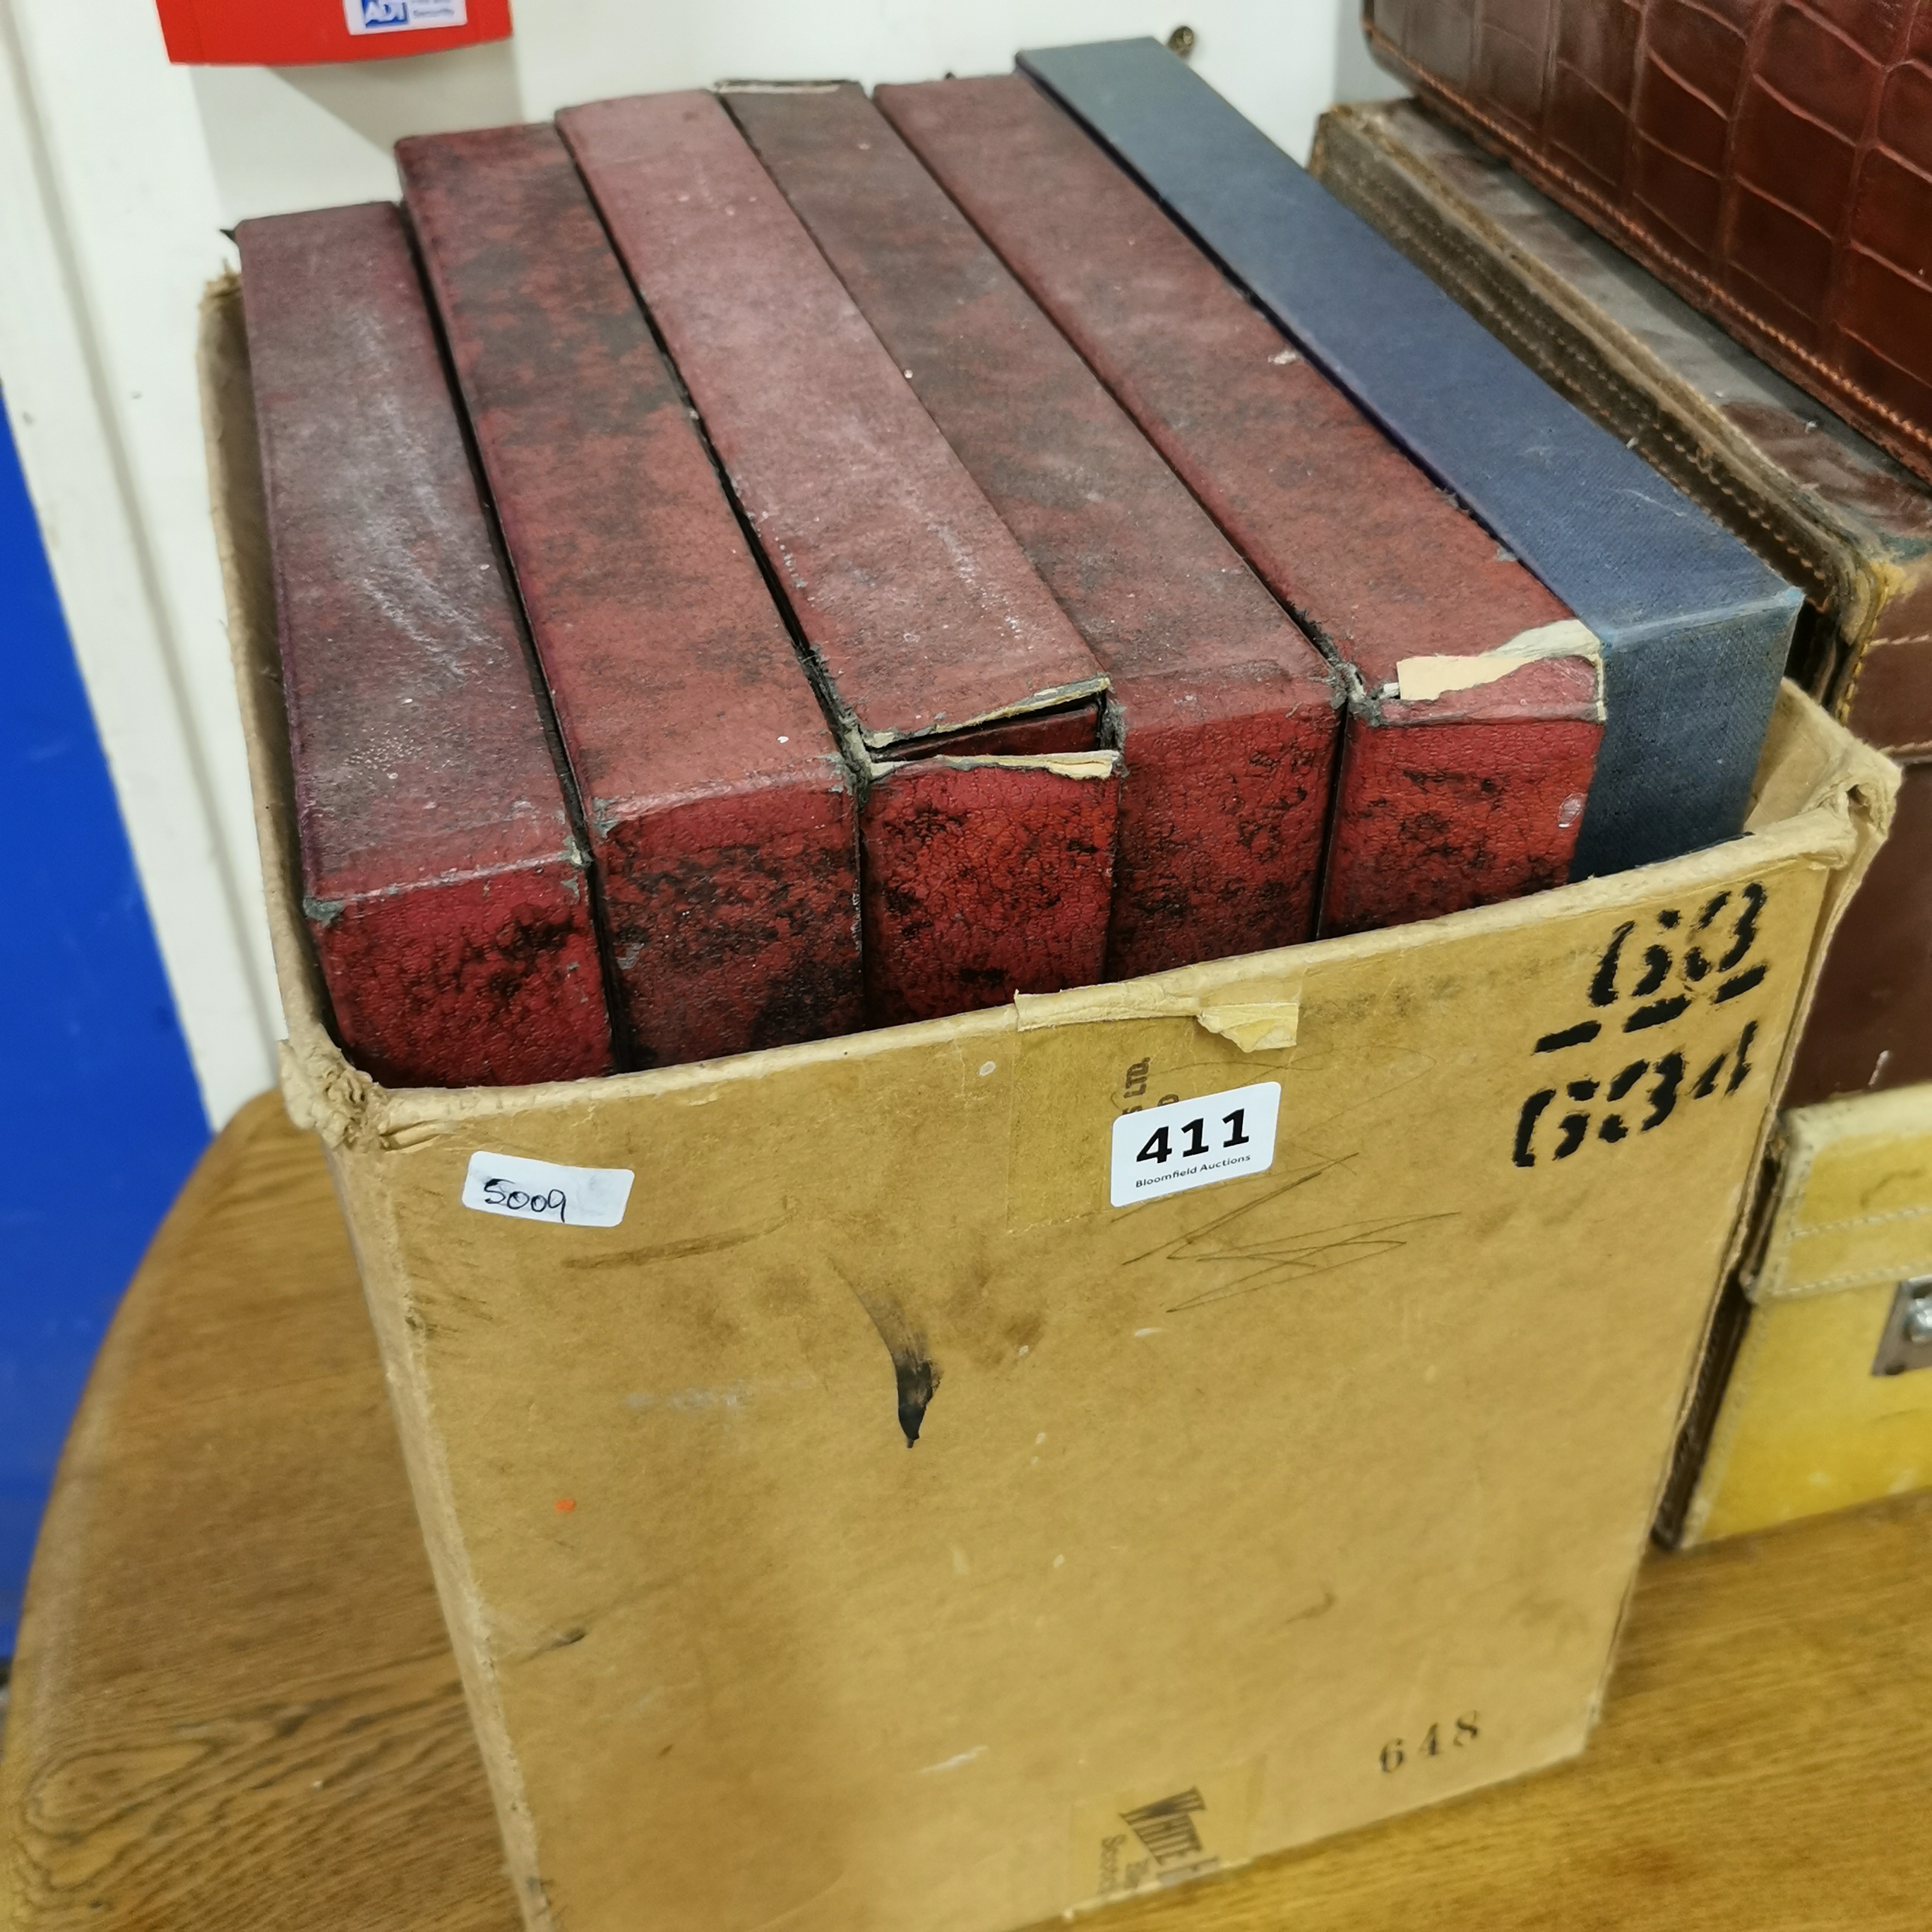 COMPLETE WORKS OF SHAKESPEARE ON RECORD